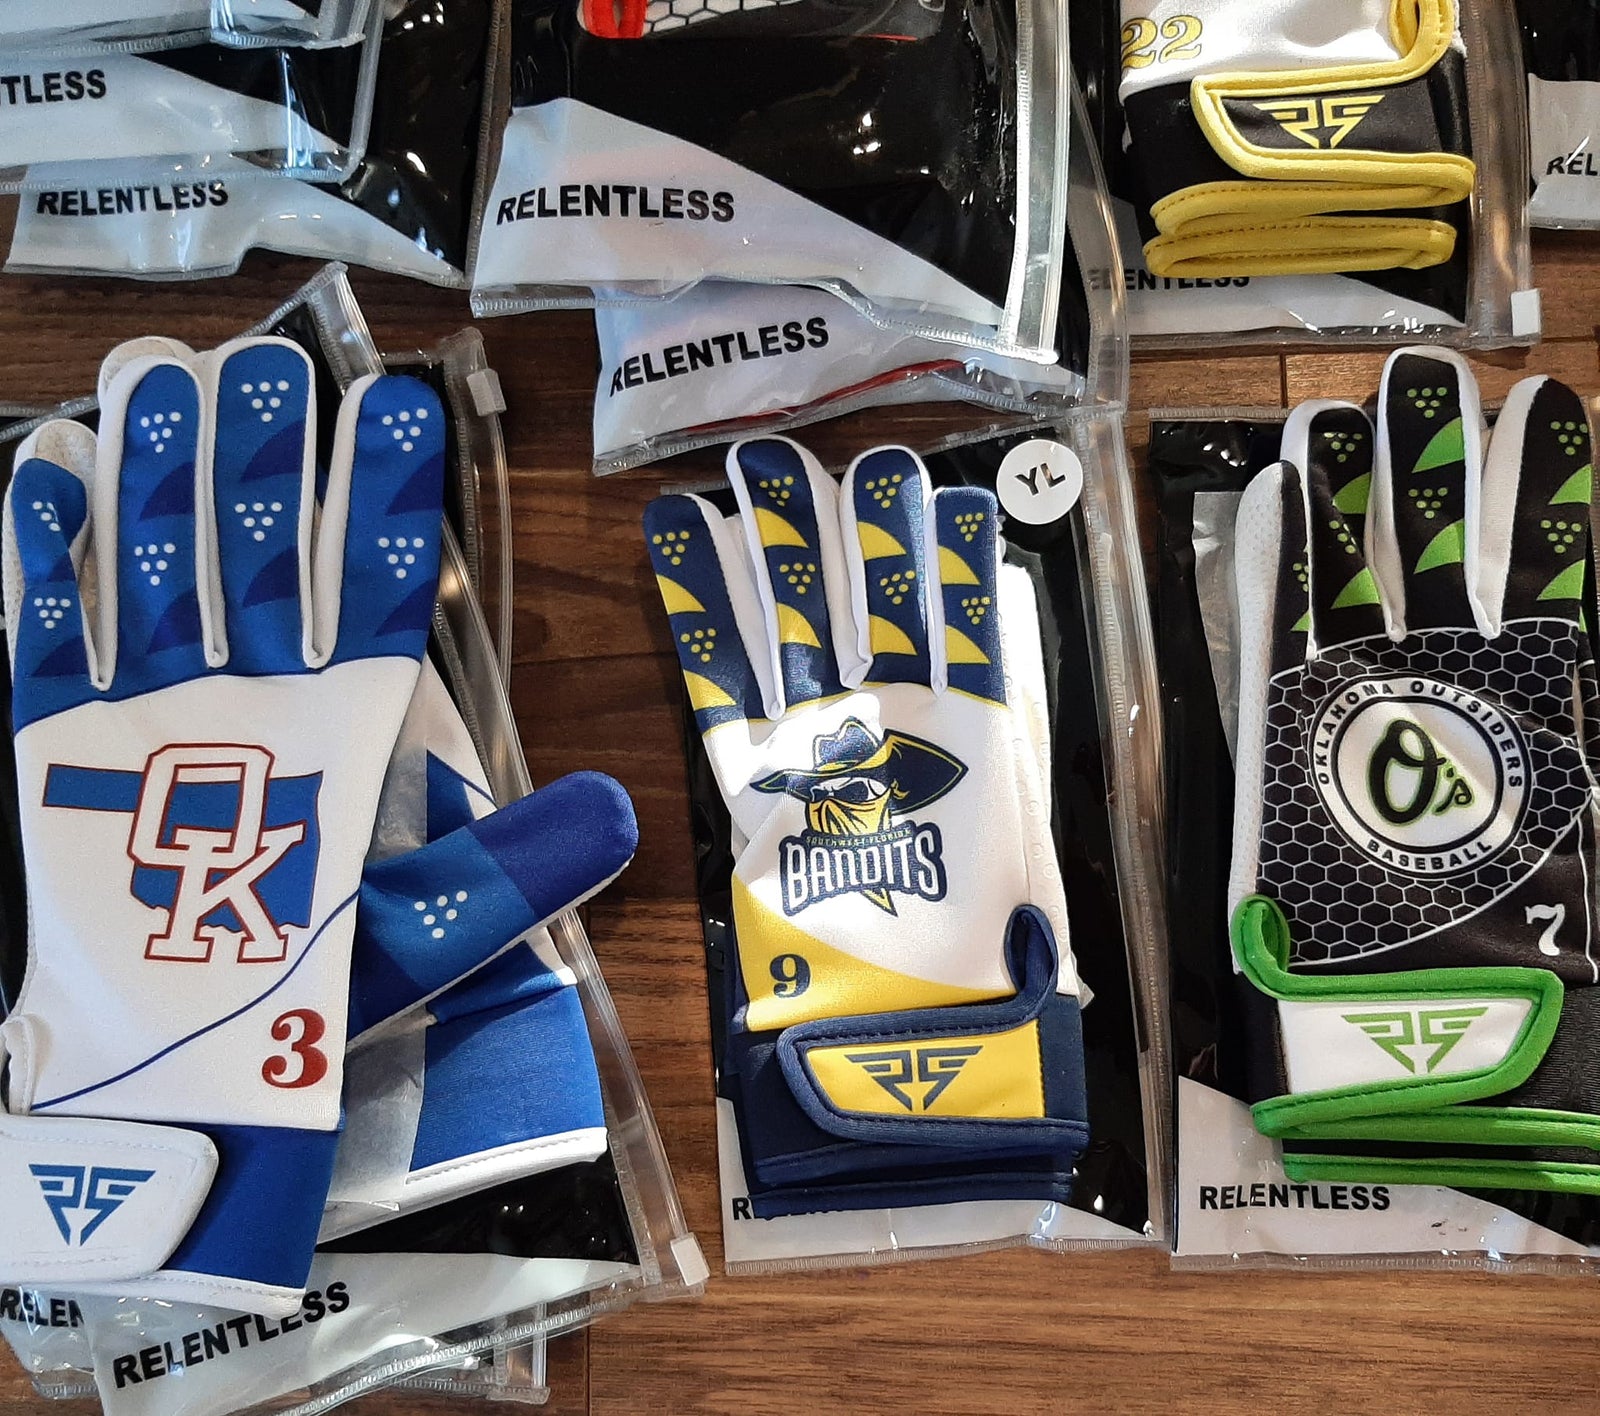 Batting Gloves With Your Name On Them - Relentless Sports